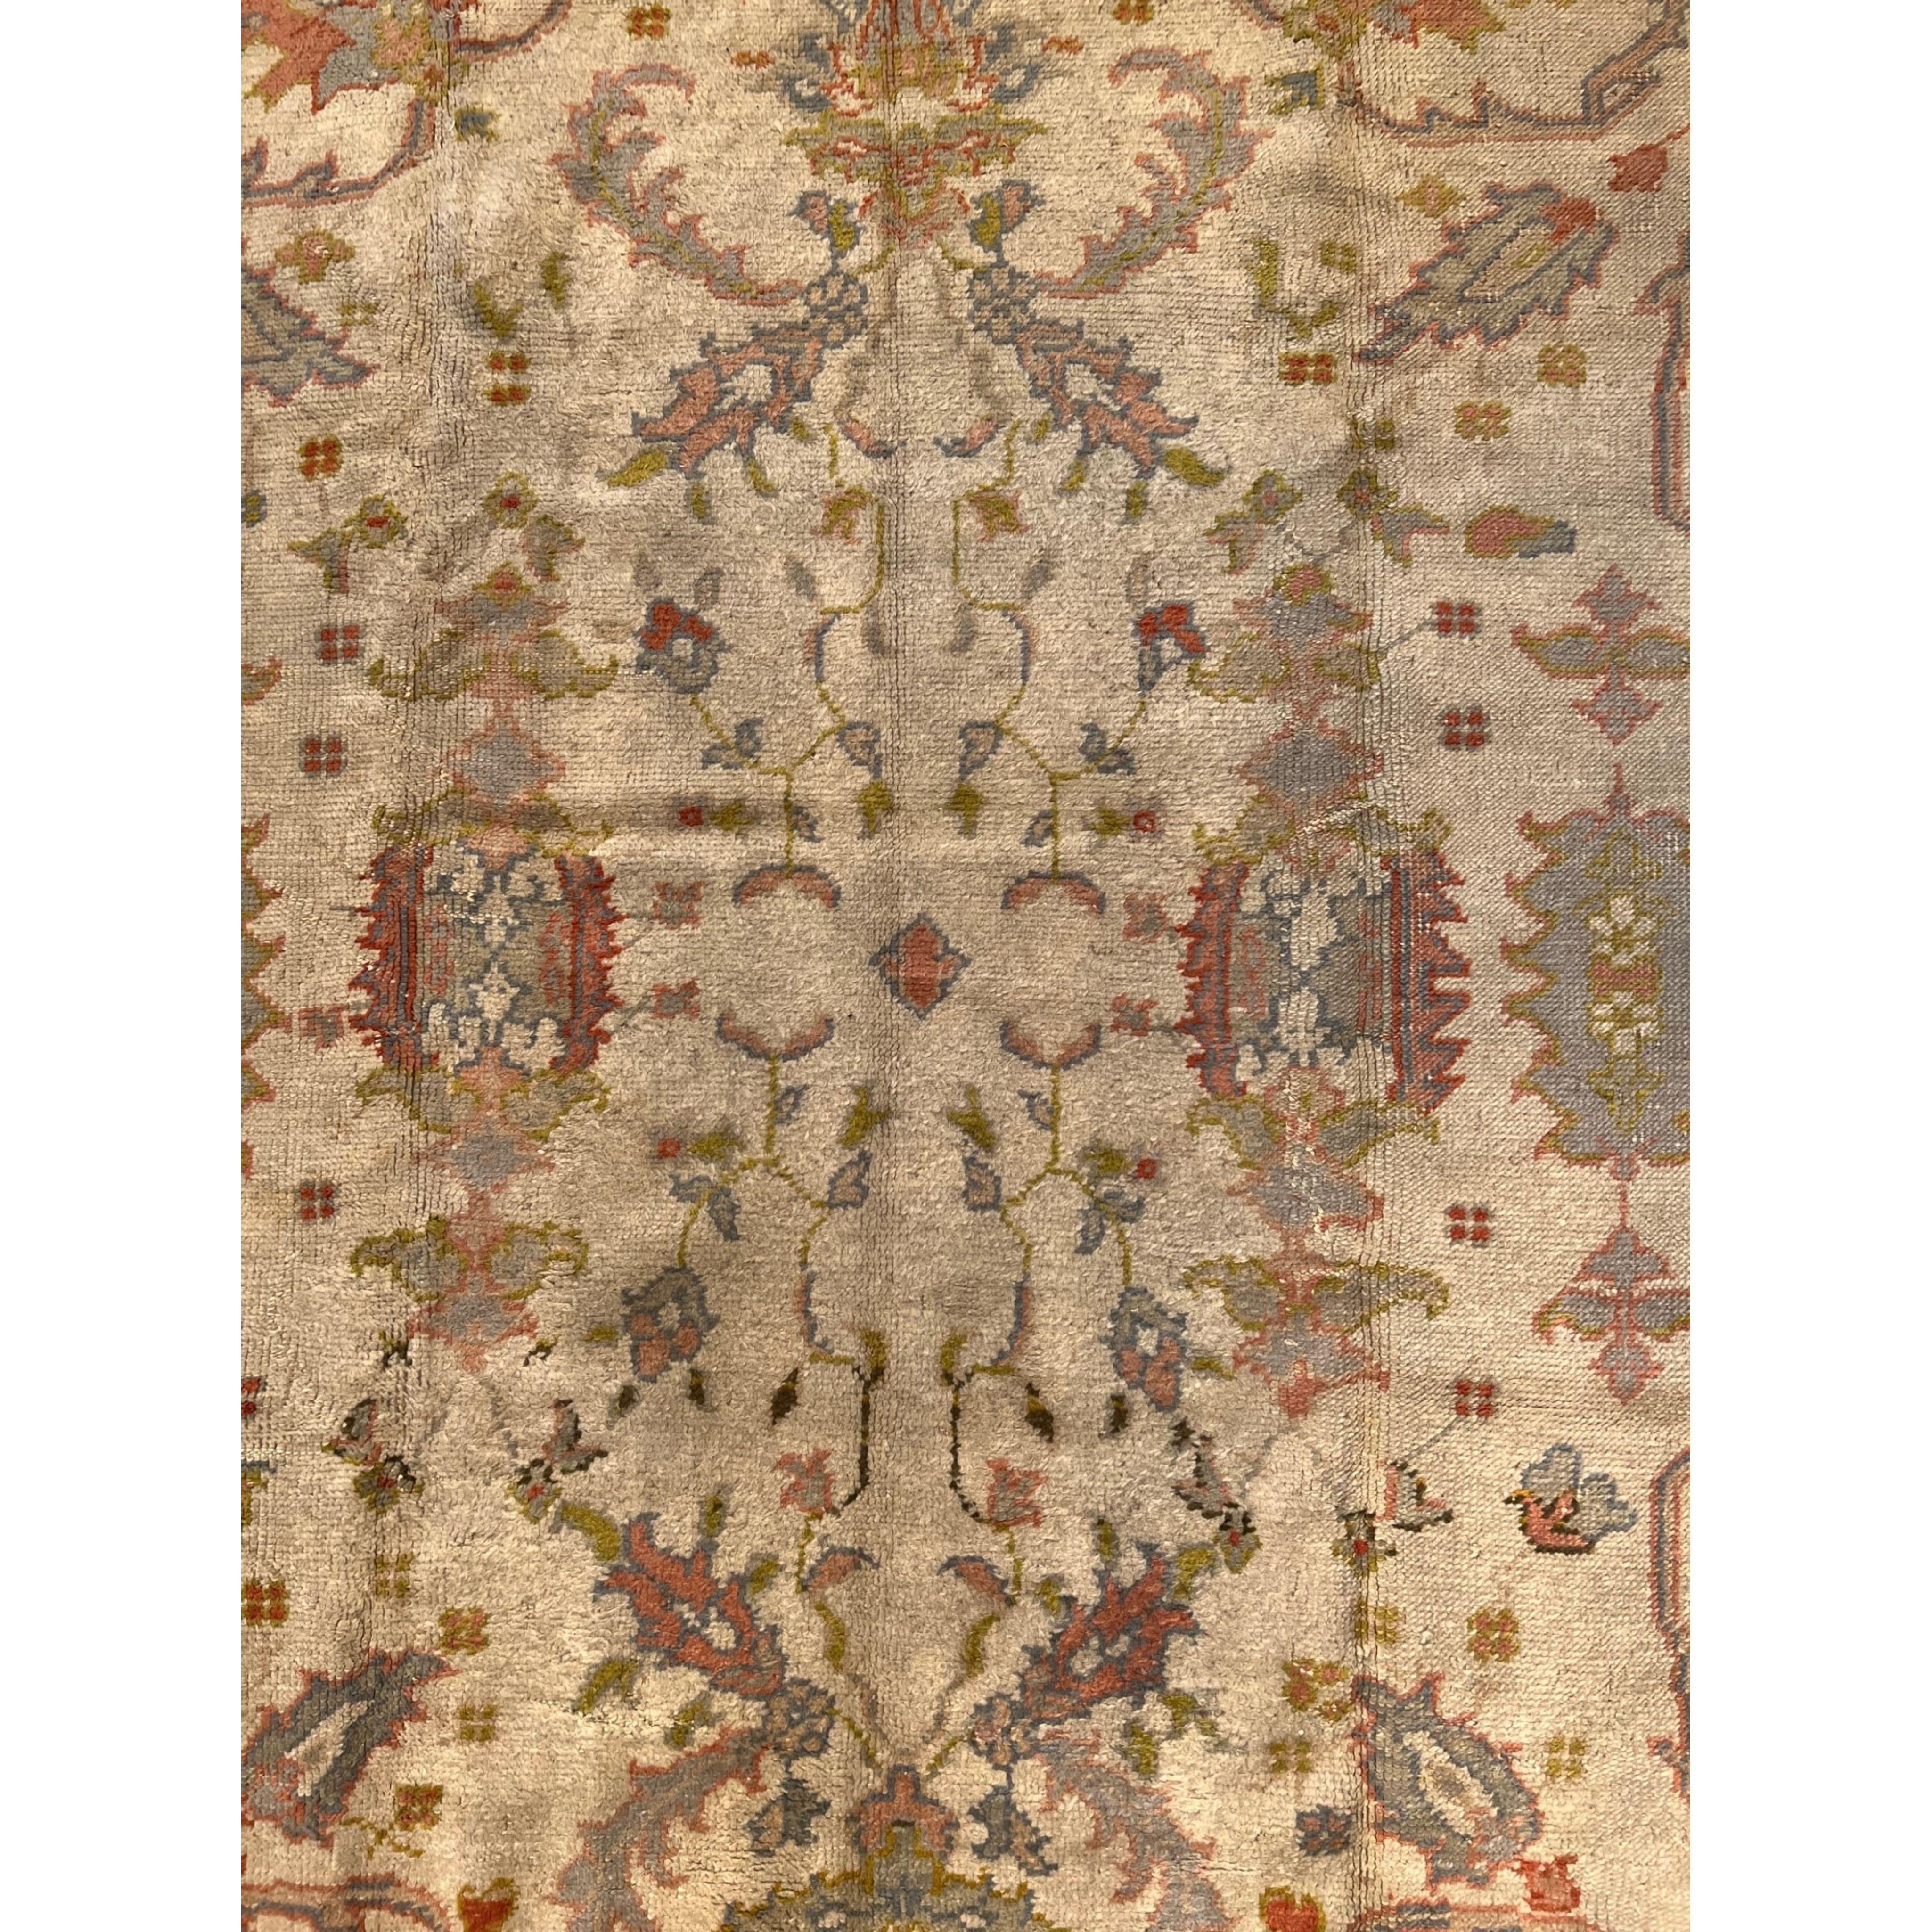 Antique Oushak Rug 11.3x8.2 In Good Condition For Sale In Los Angeles, US